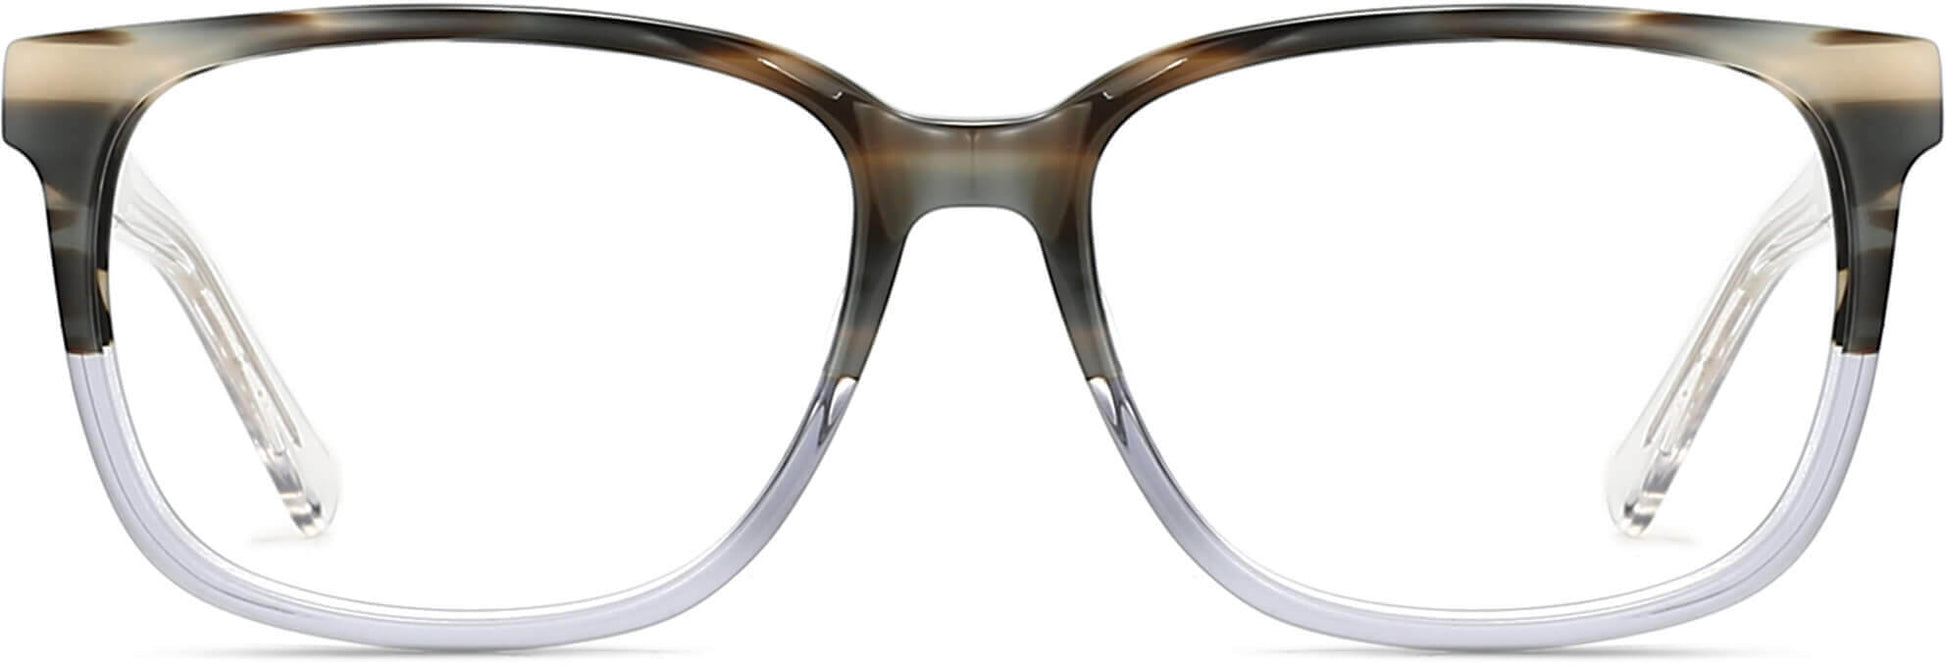 Mabel Square Tortoise Eyeglasses from ANRRI, front view